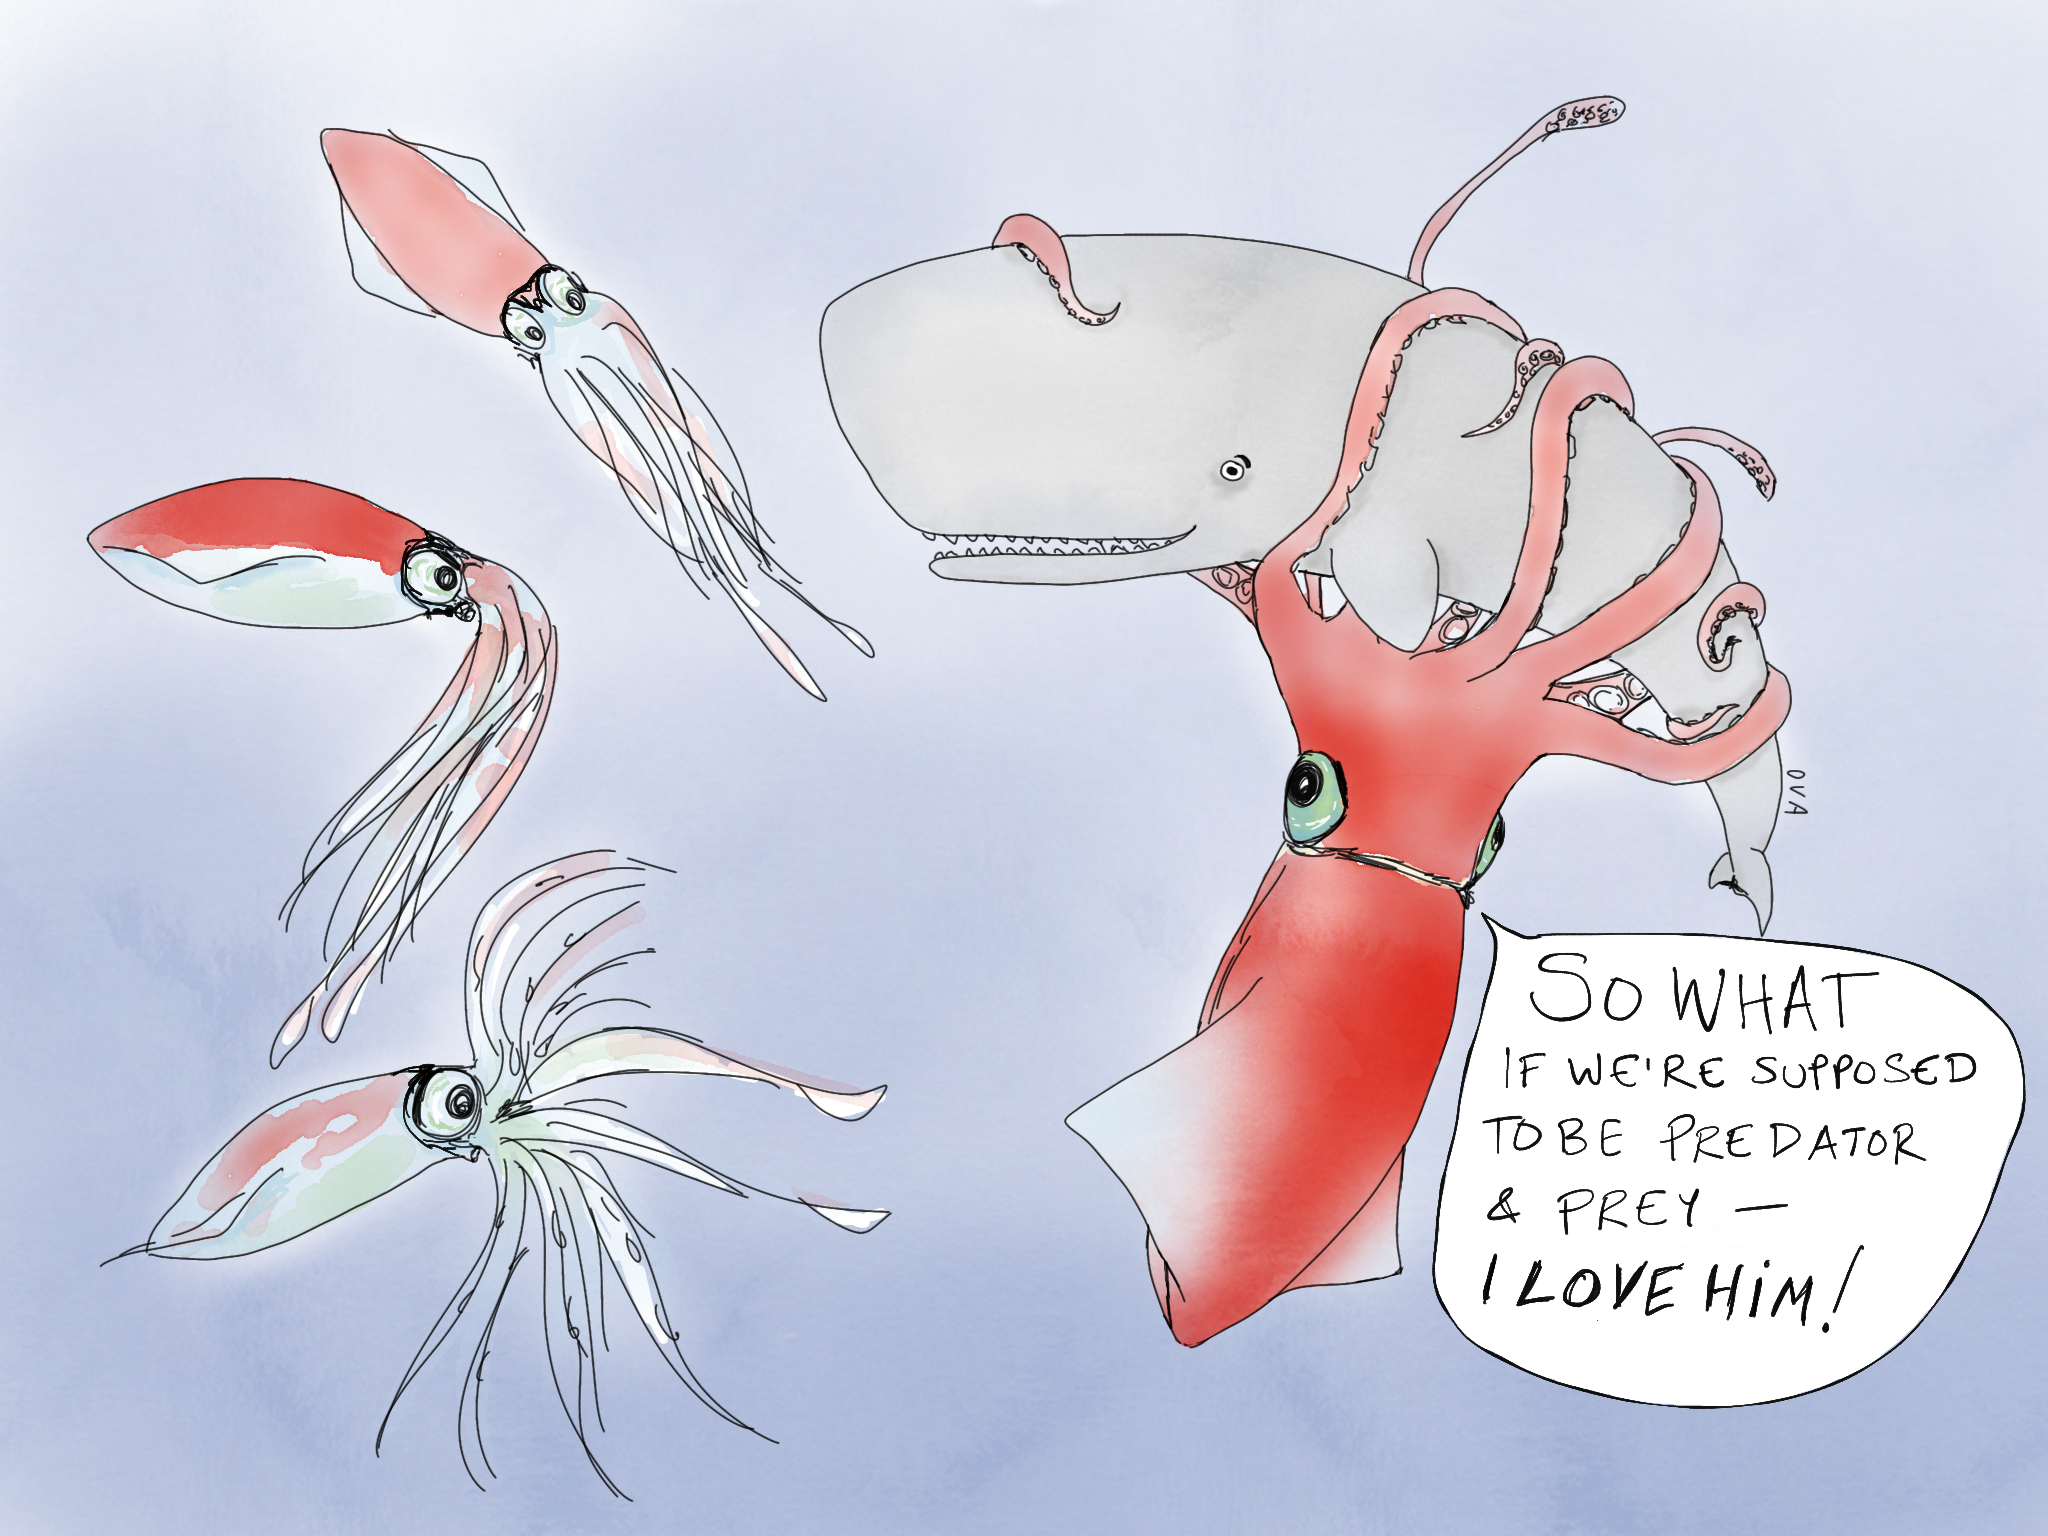 Cartoon for a lesson on storytelling. A squid embraces a whale, telling 3 other squid "So what if we're supposed to be predator and prey - I love him!"